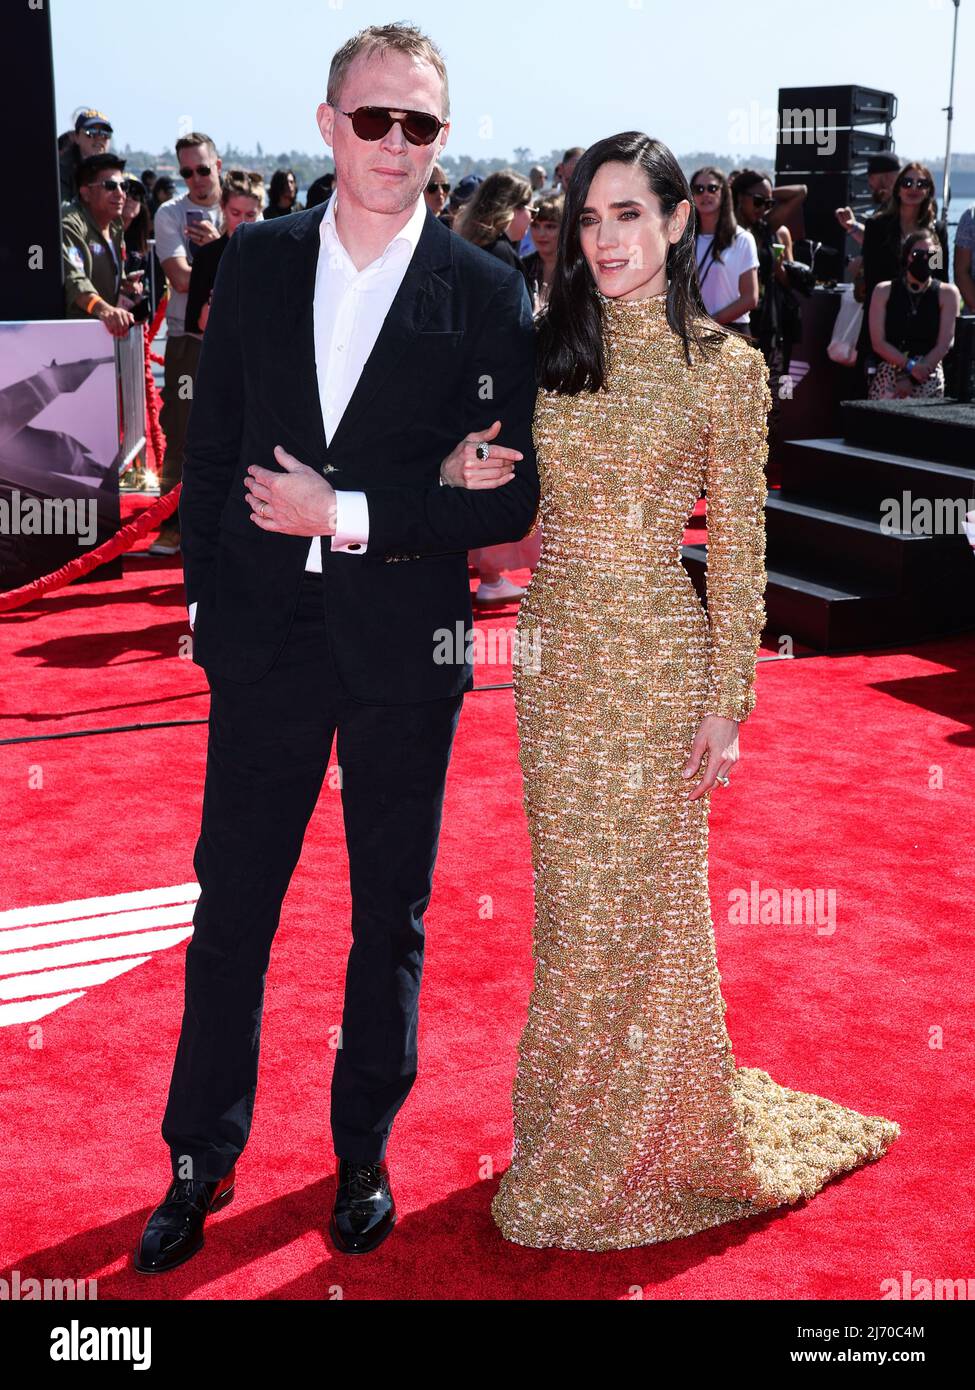 SAN DIEGO, CALIFORNIA, USA - MAY 04: English actor Paul Bettany and wife/American actress Jennifer Connelly arrive at the World Premiere Of Paramount Pictures' 'Top Gun: Maverick' held at the USS Midway Museum on May 4, 2022 in San Diego, California, United States. (Photo by Xavier Collin/Image Press Agency) Stock Photo